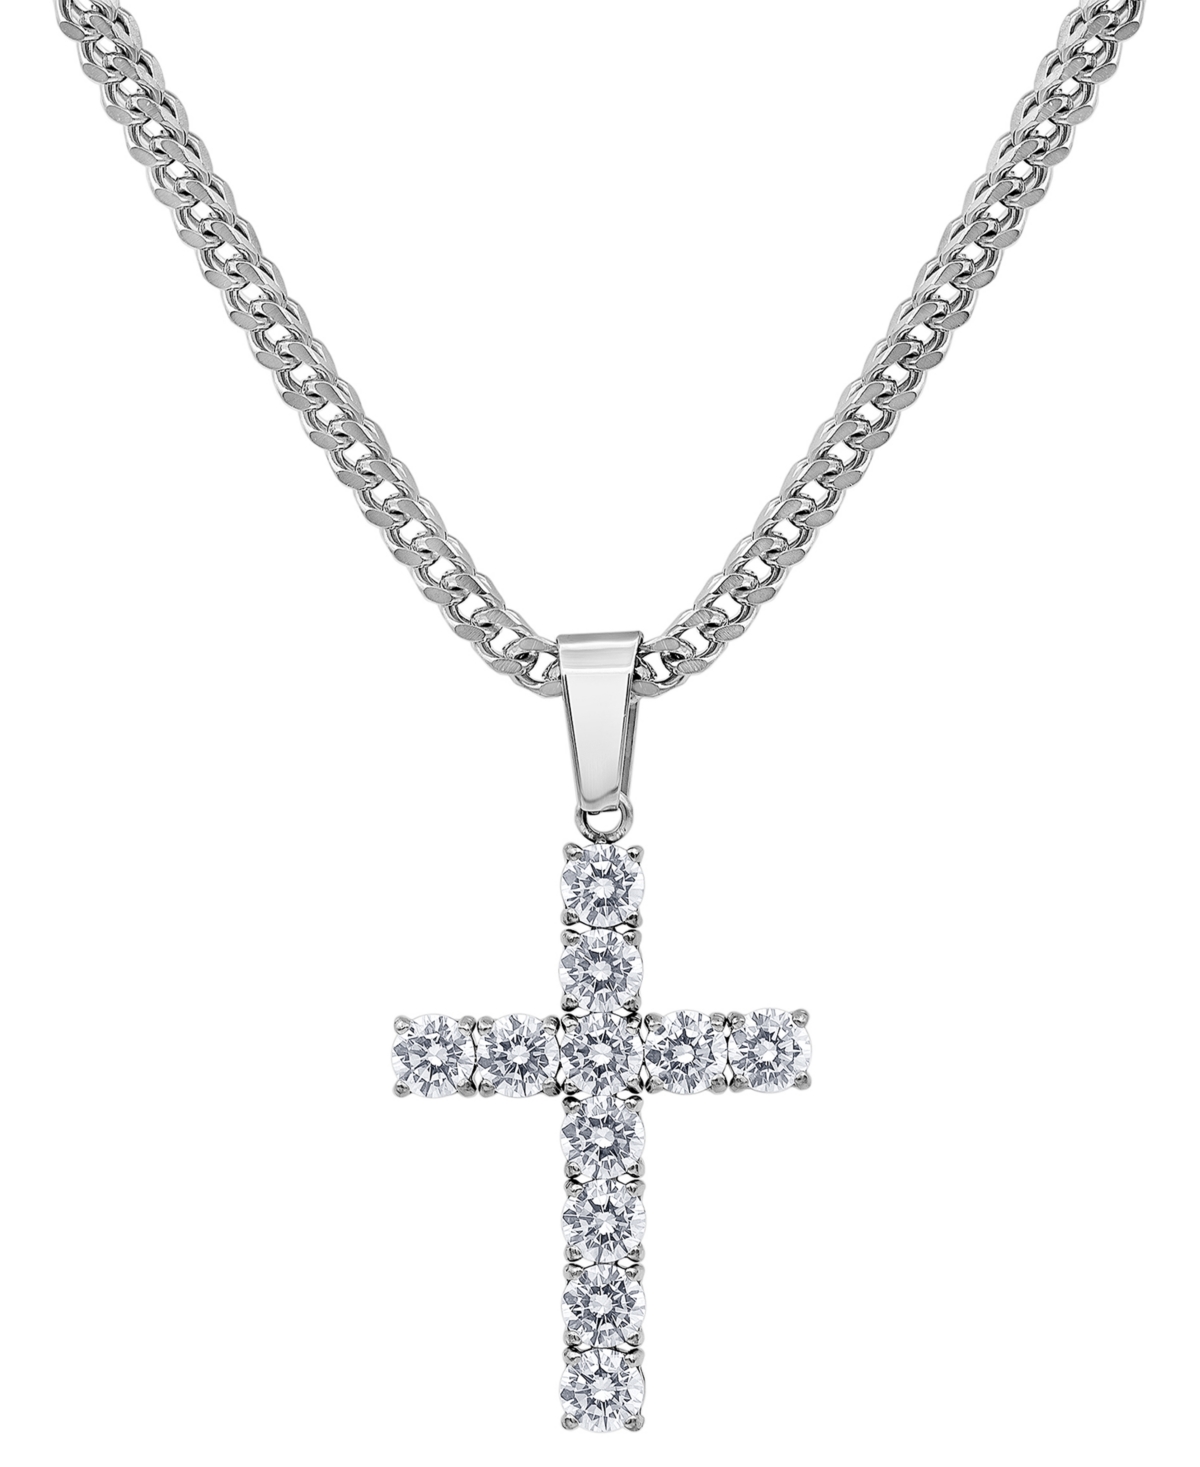 Men's Cubic Zirconia Cross 24" Pendant Necklace in Black-Ion Plated Stainless Steel - Gold-Tone